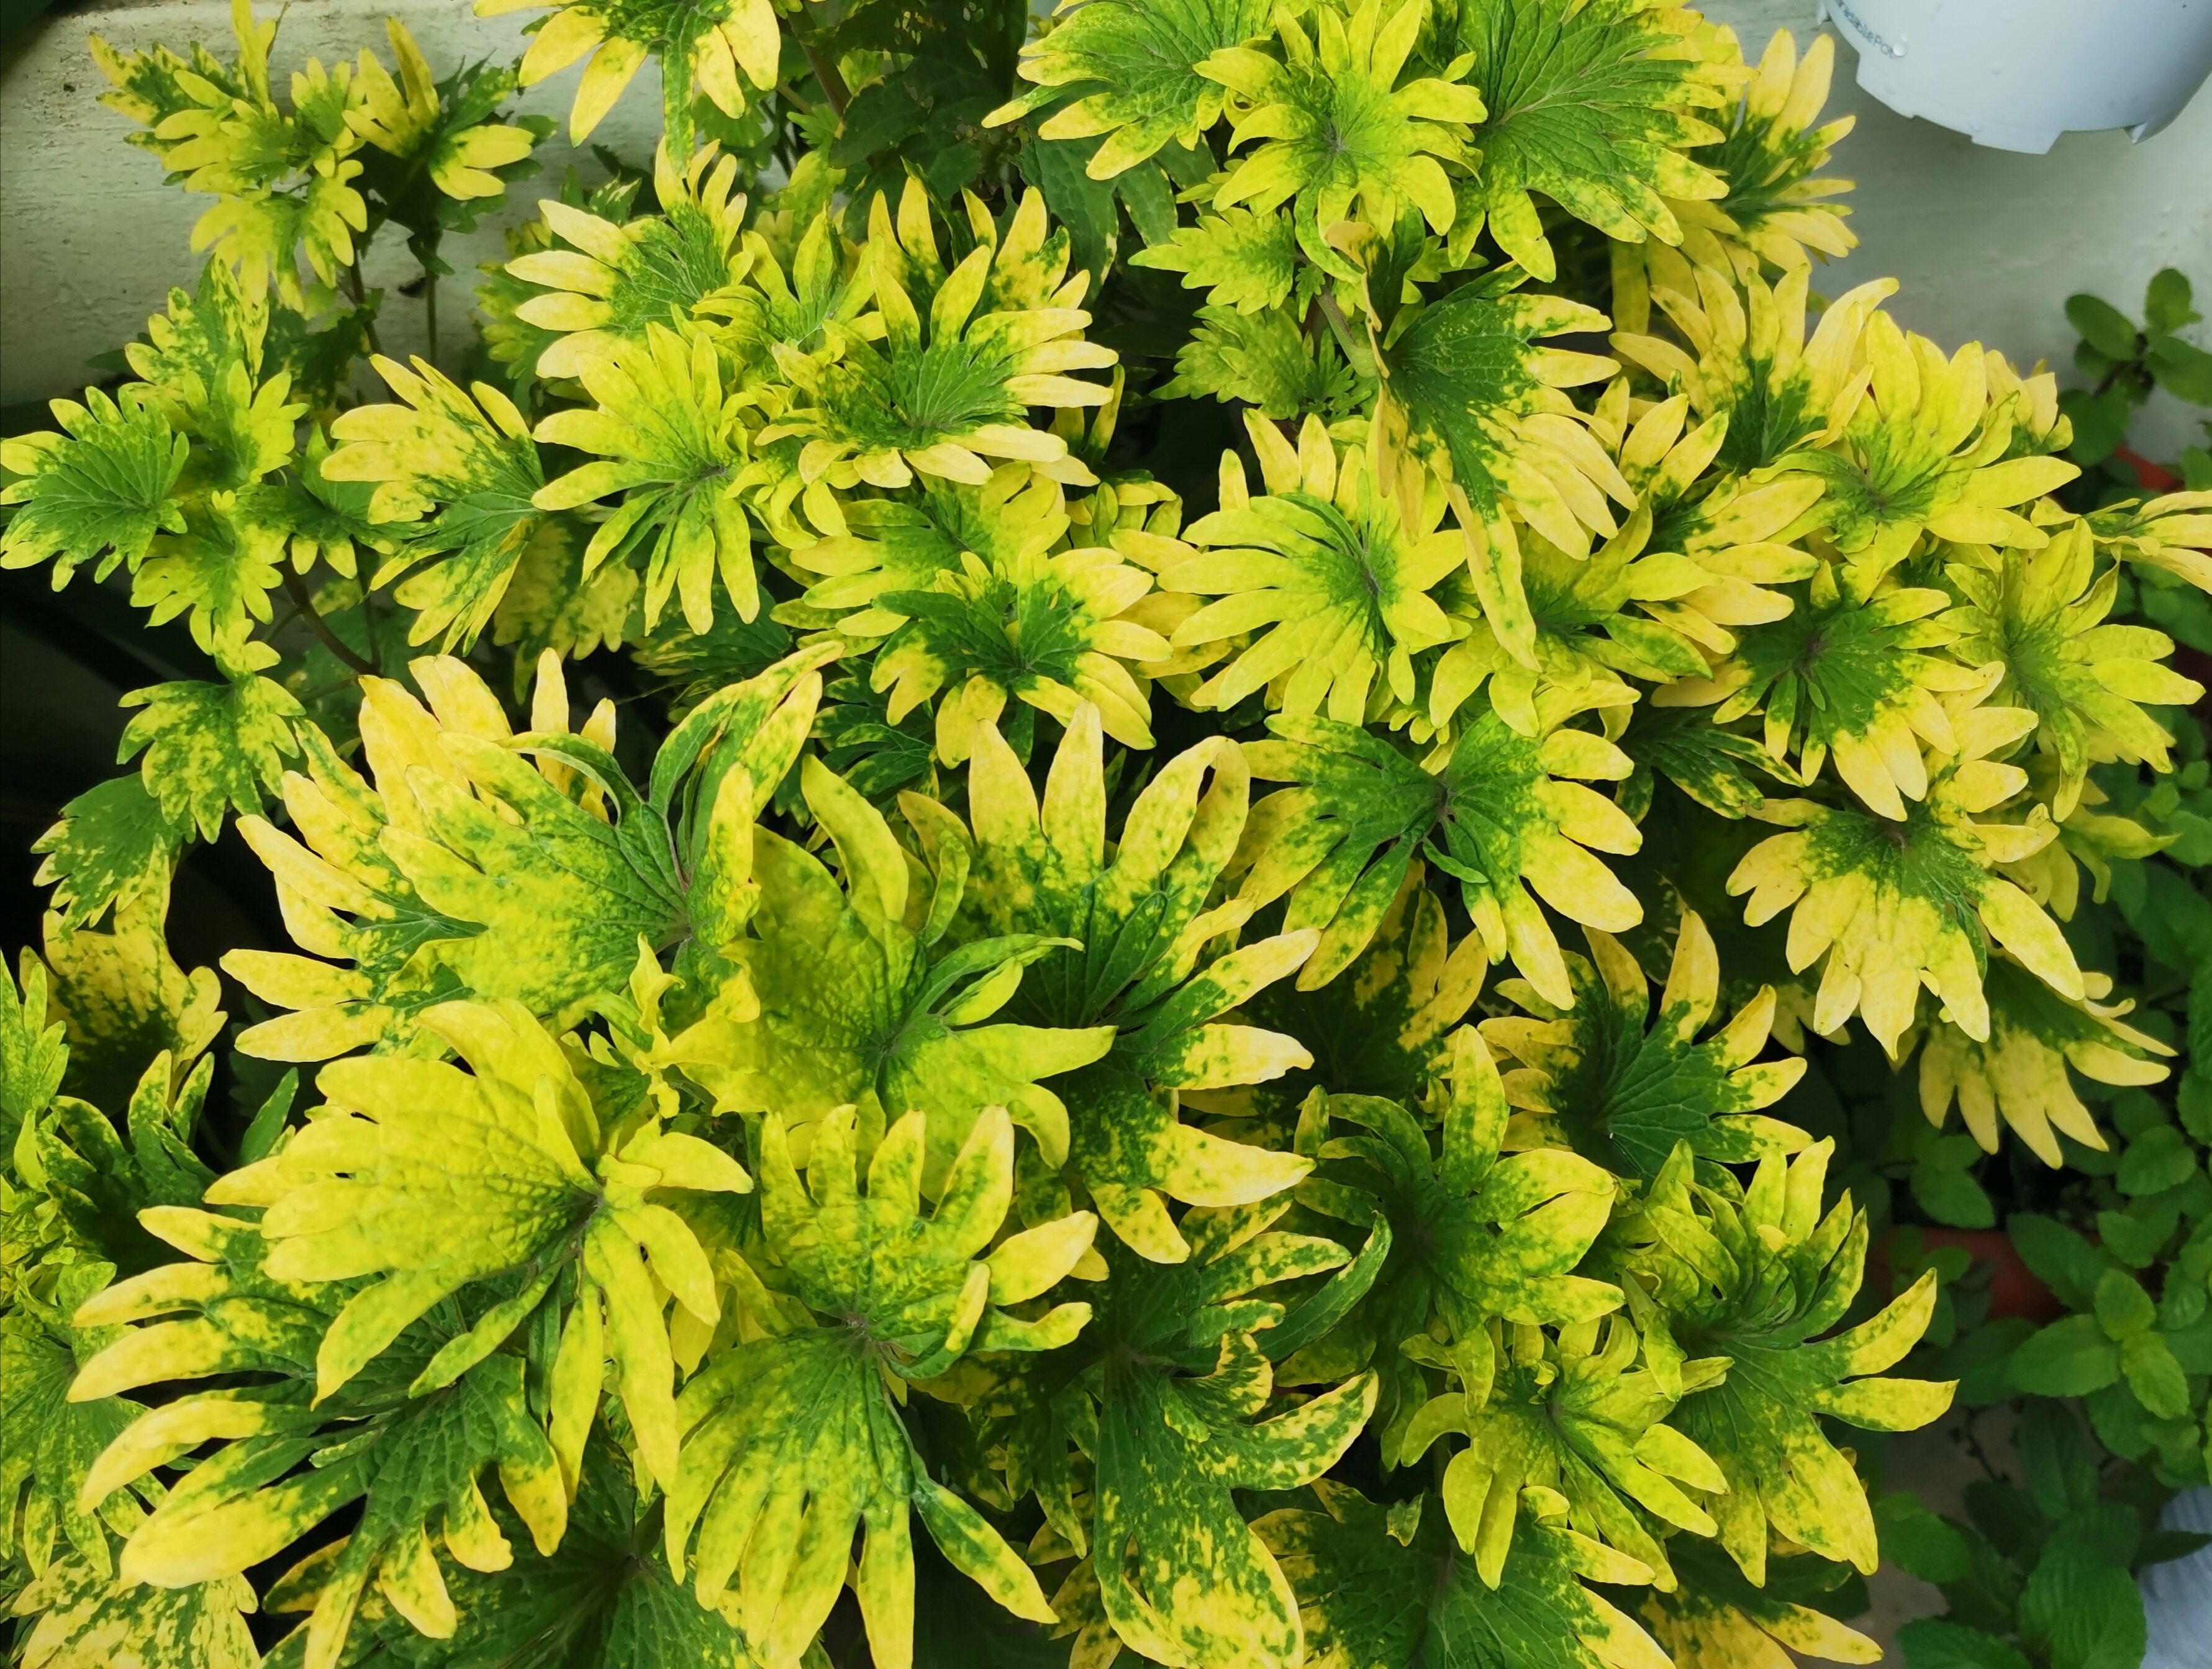 At03 Coleus Yellow Gold 1 Stem Cutting Without Roots 支条 黄金彩叶 Lazada